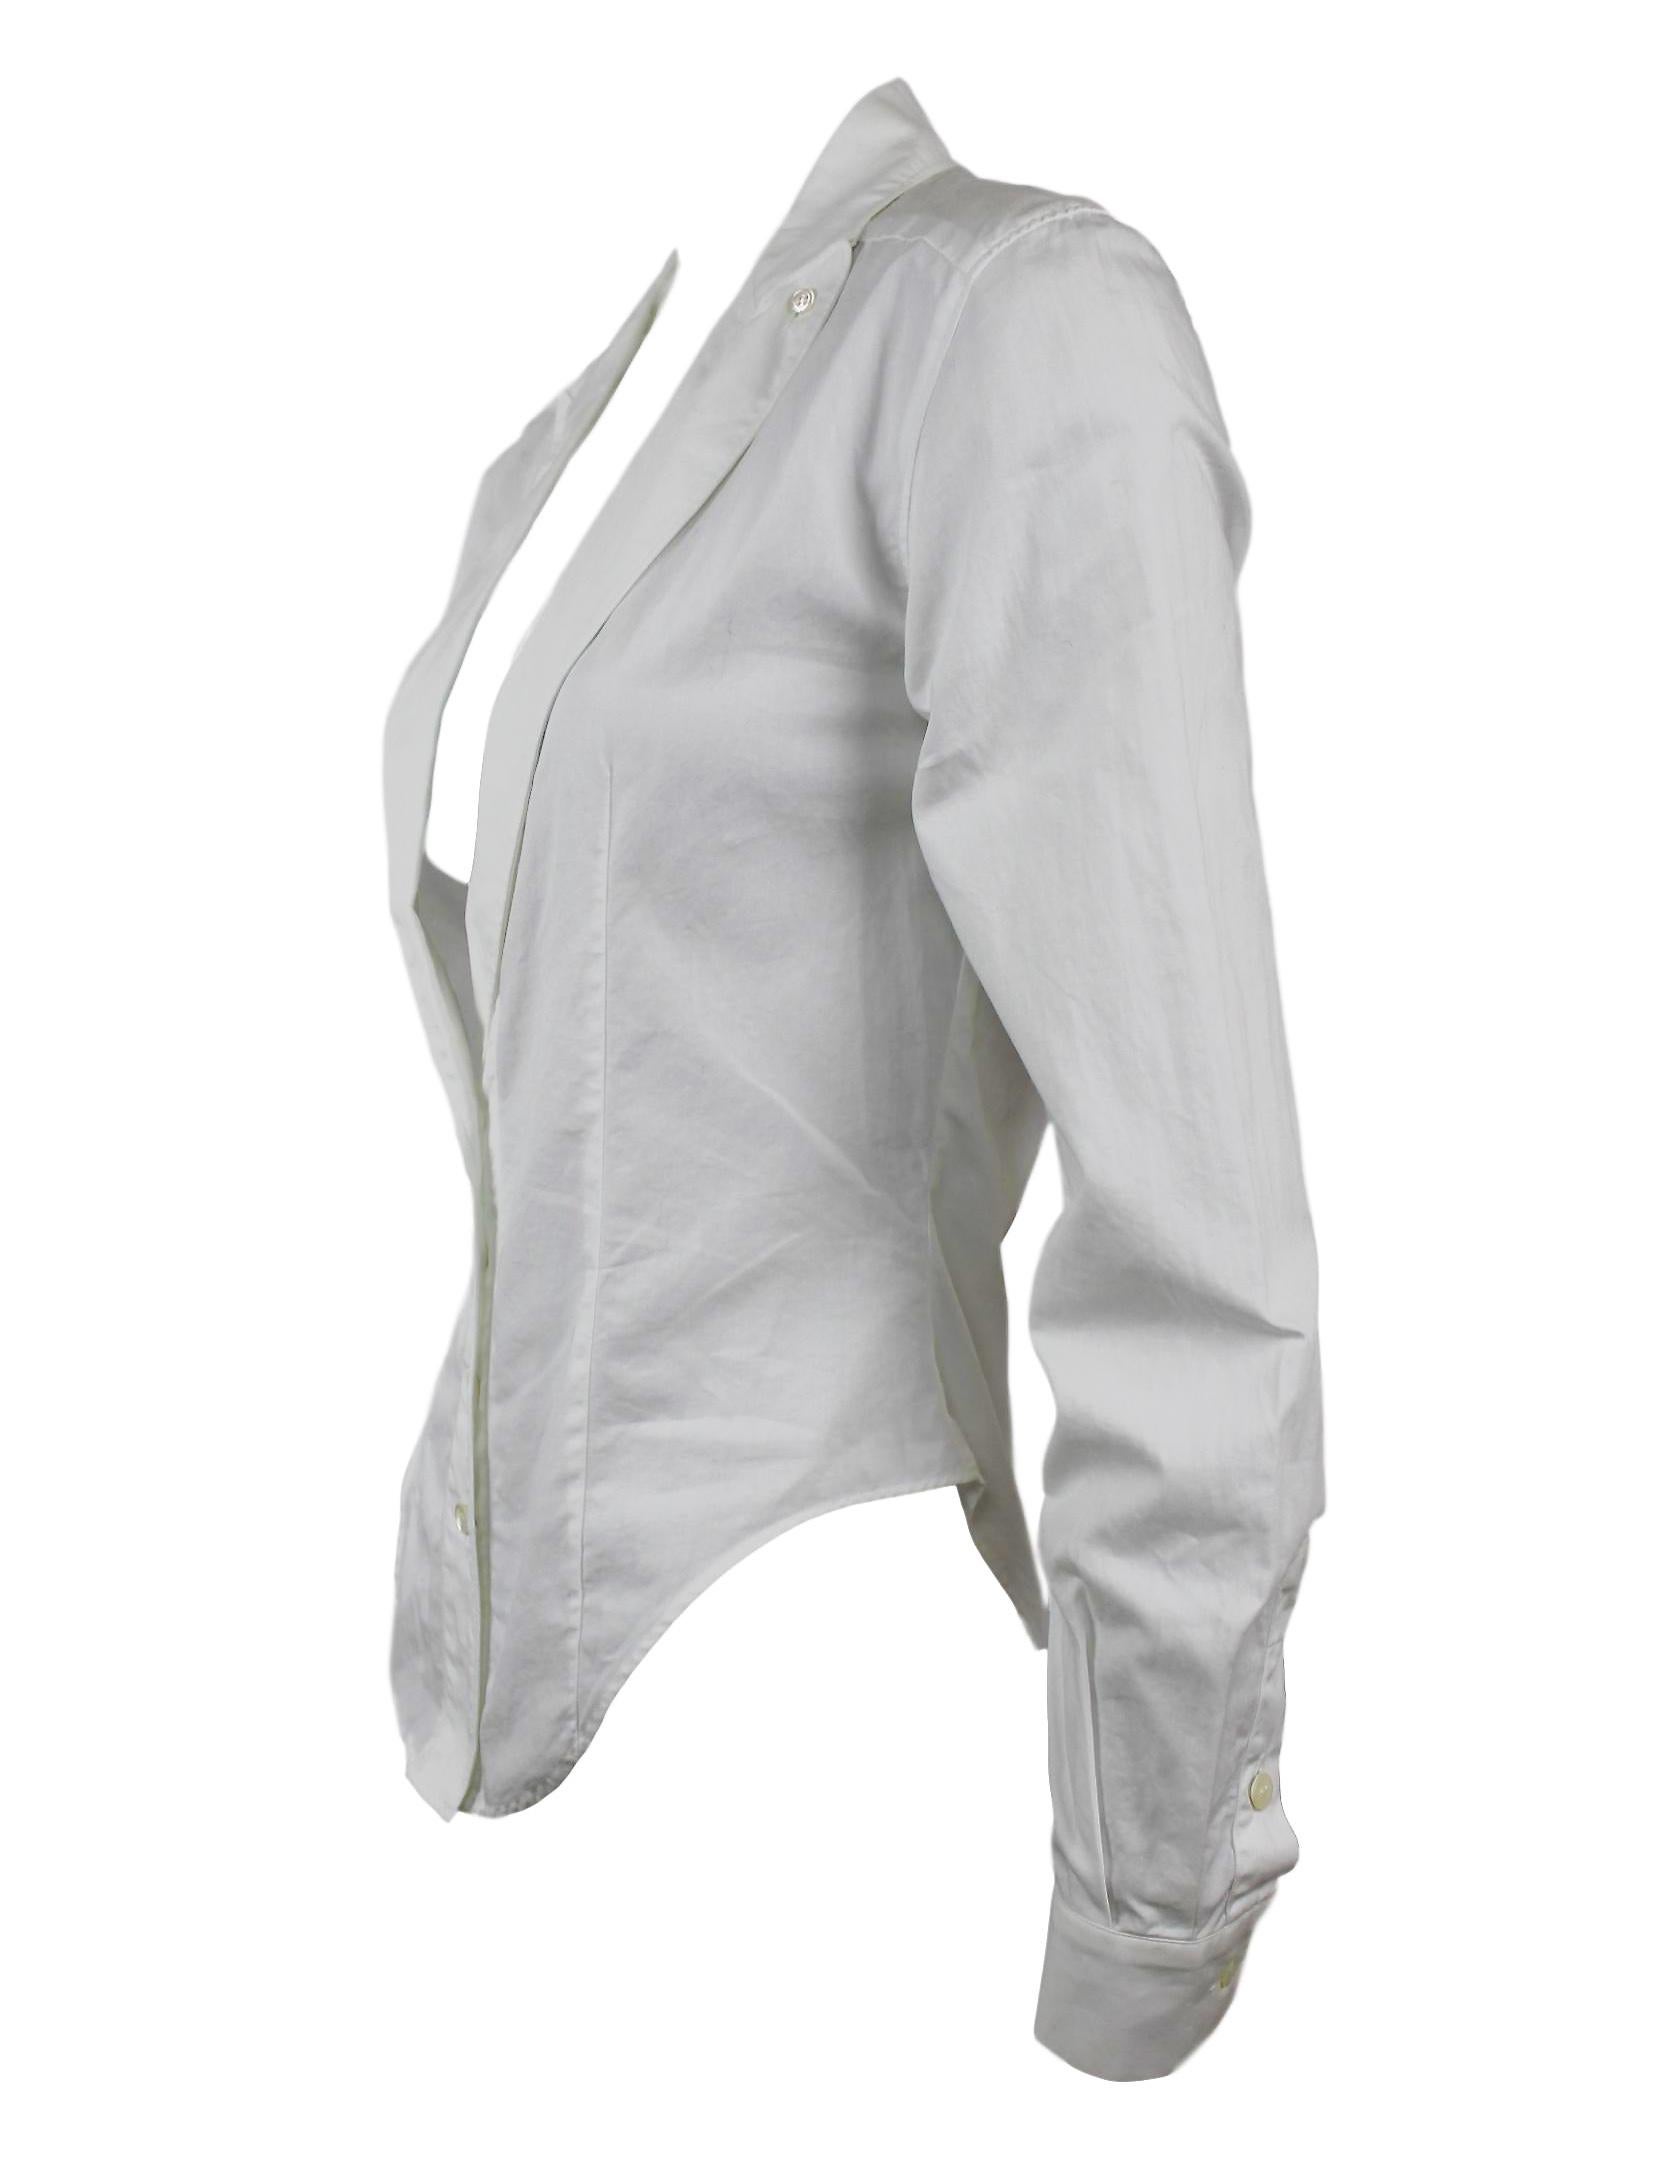 Women's Alexander McQueen Early Collection Fitted Blouse/Jacket For Sale